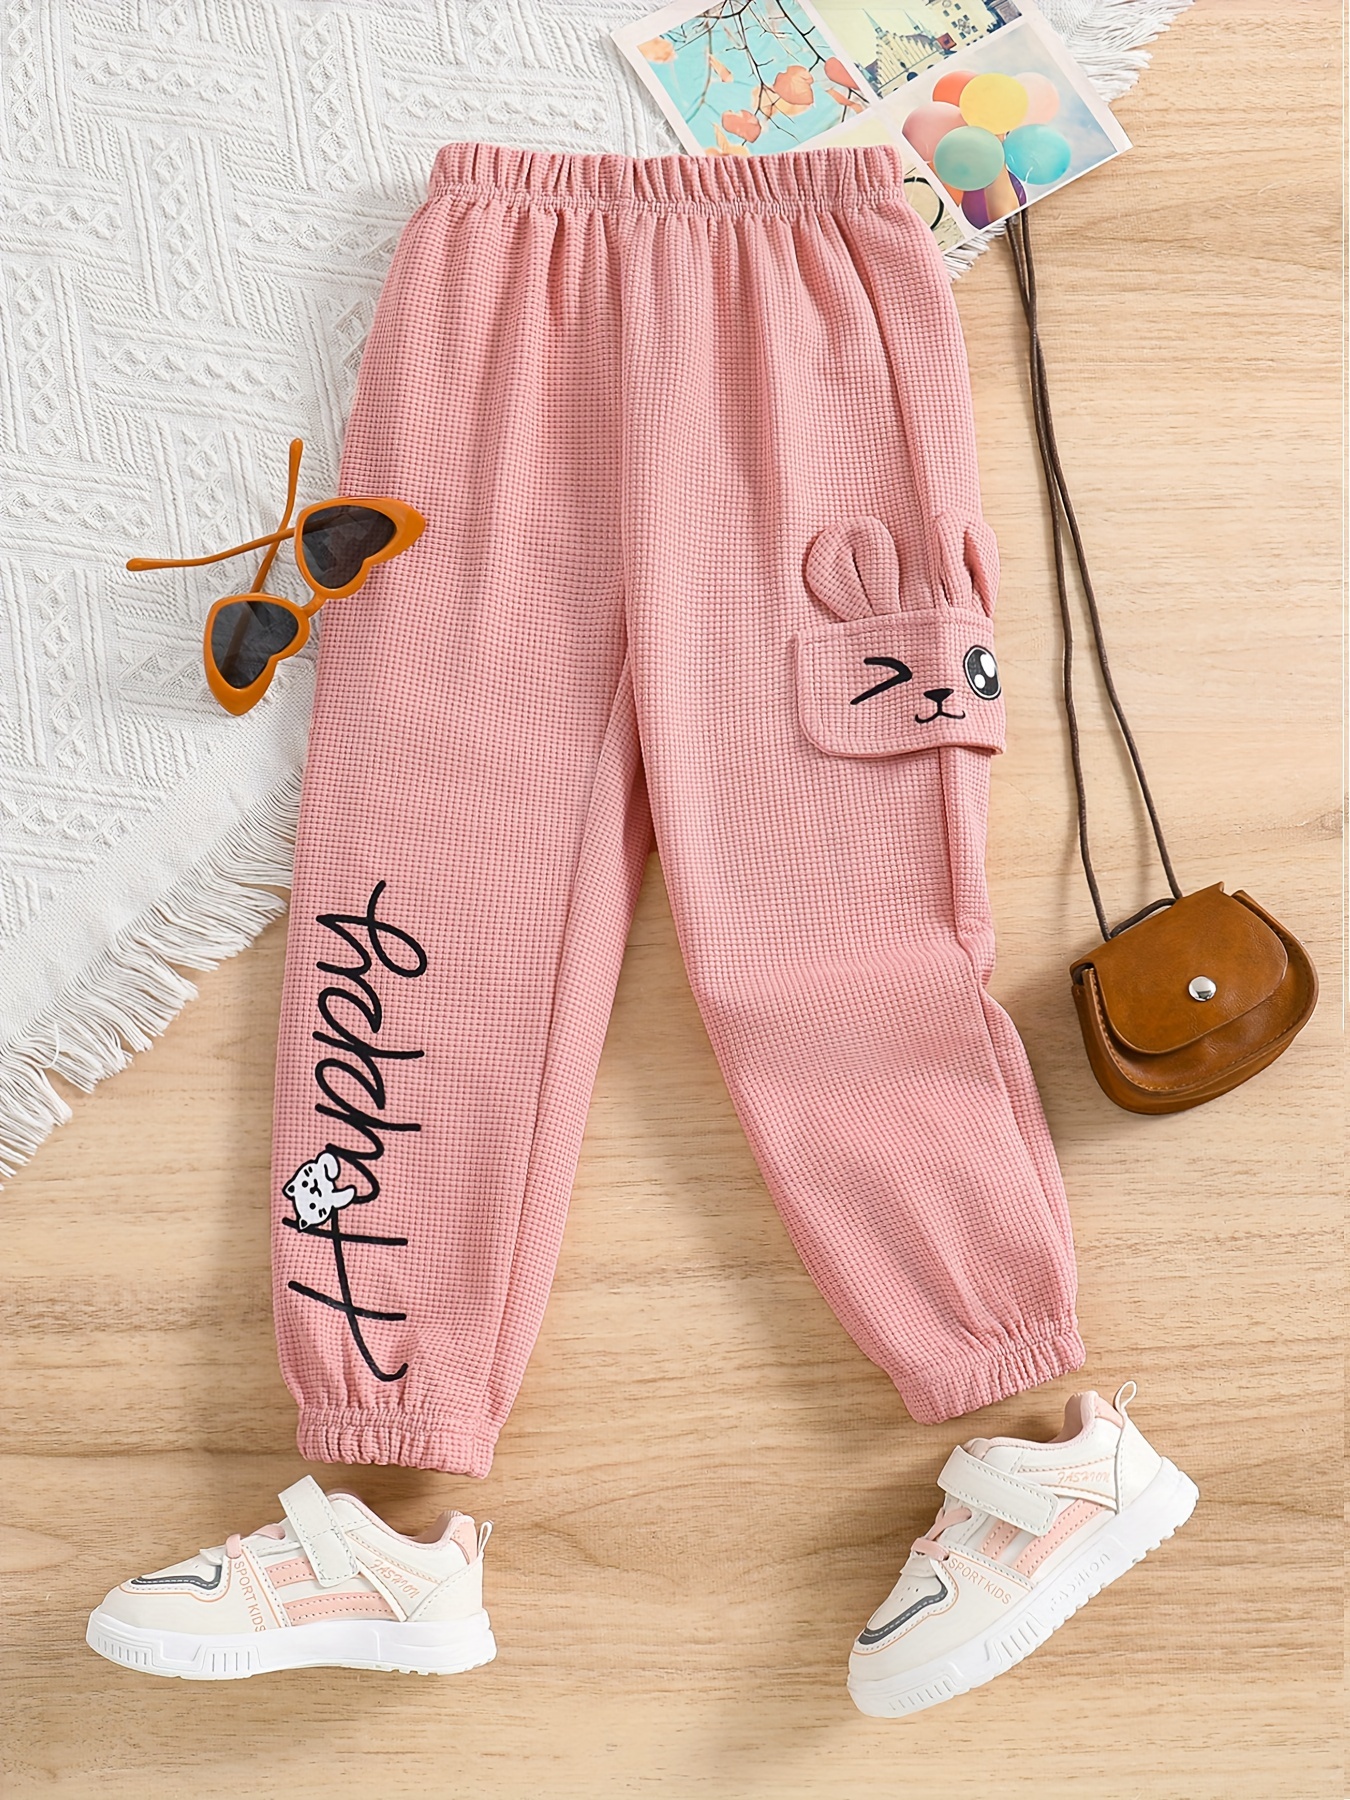 Kids Baby Cute Print Pants Old Years 3-14 Tight Fashion Children'S Zipper  Pocket Jeans Button Long Hole Girls Pants